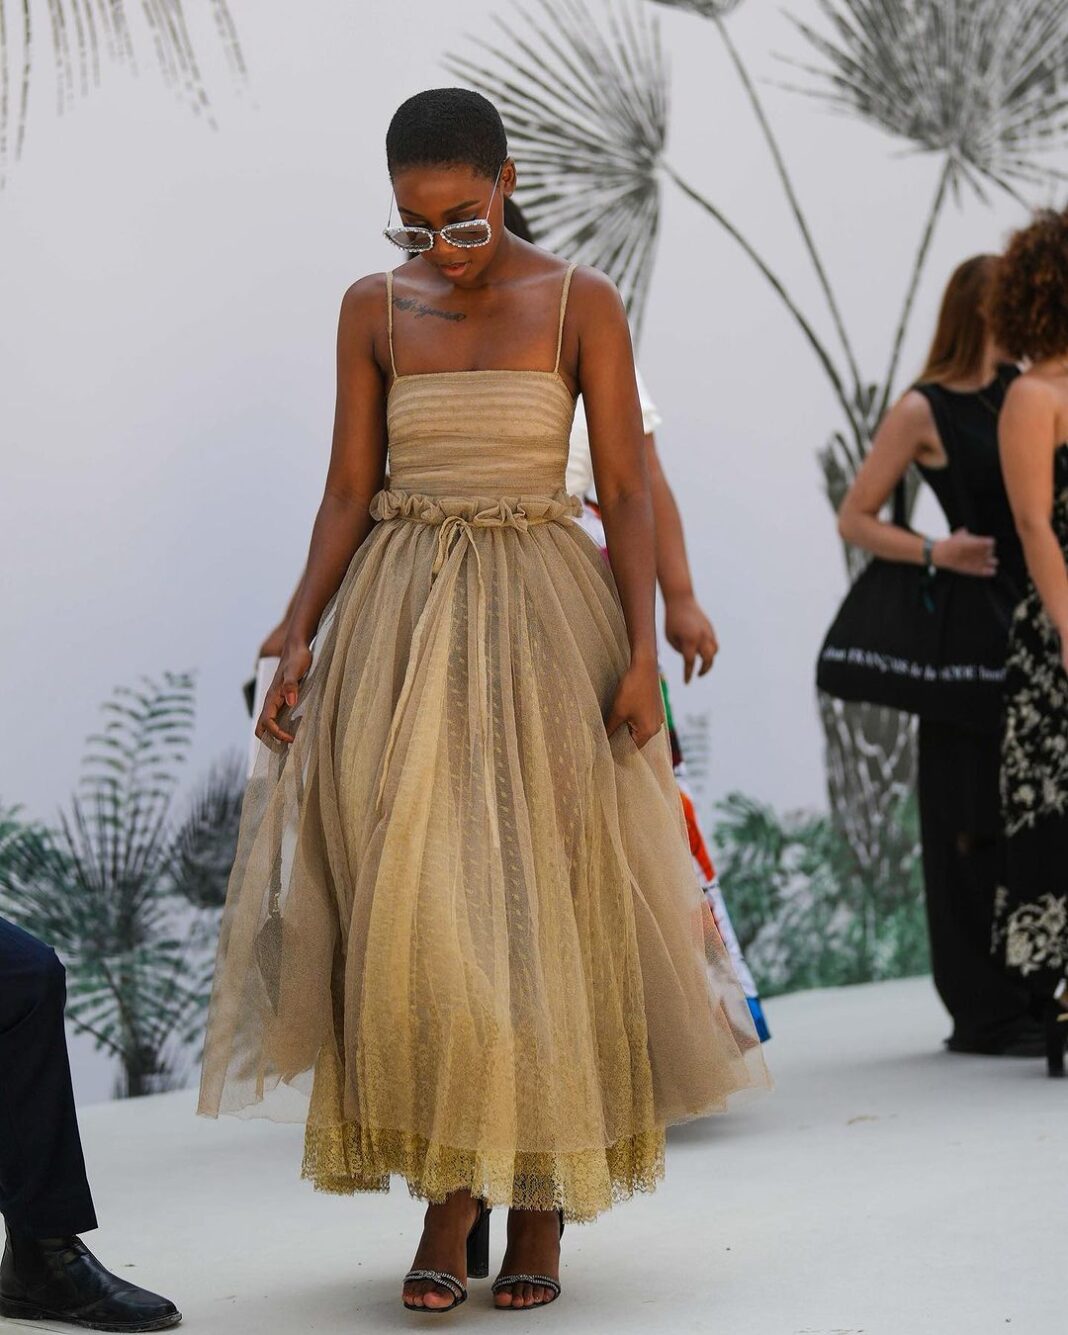 Thuso Mbedu Does Balletcore at The Dior Haute Couture Show - Leurr NG